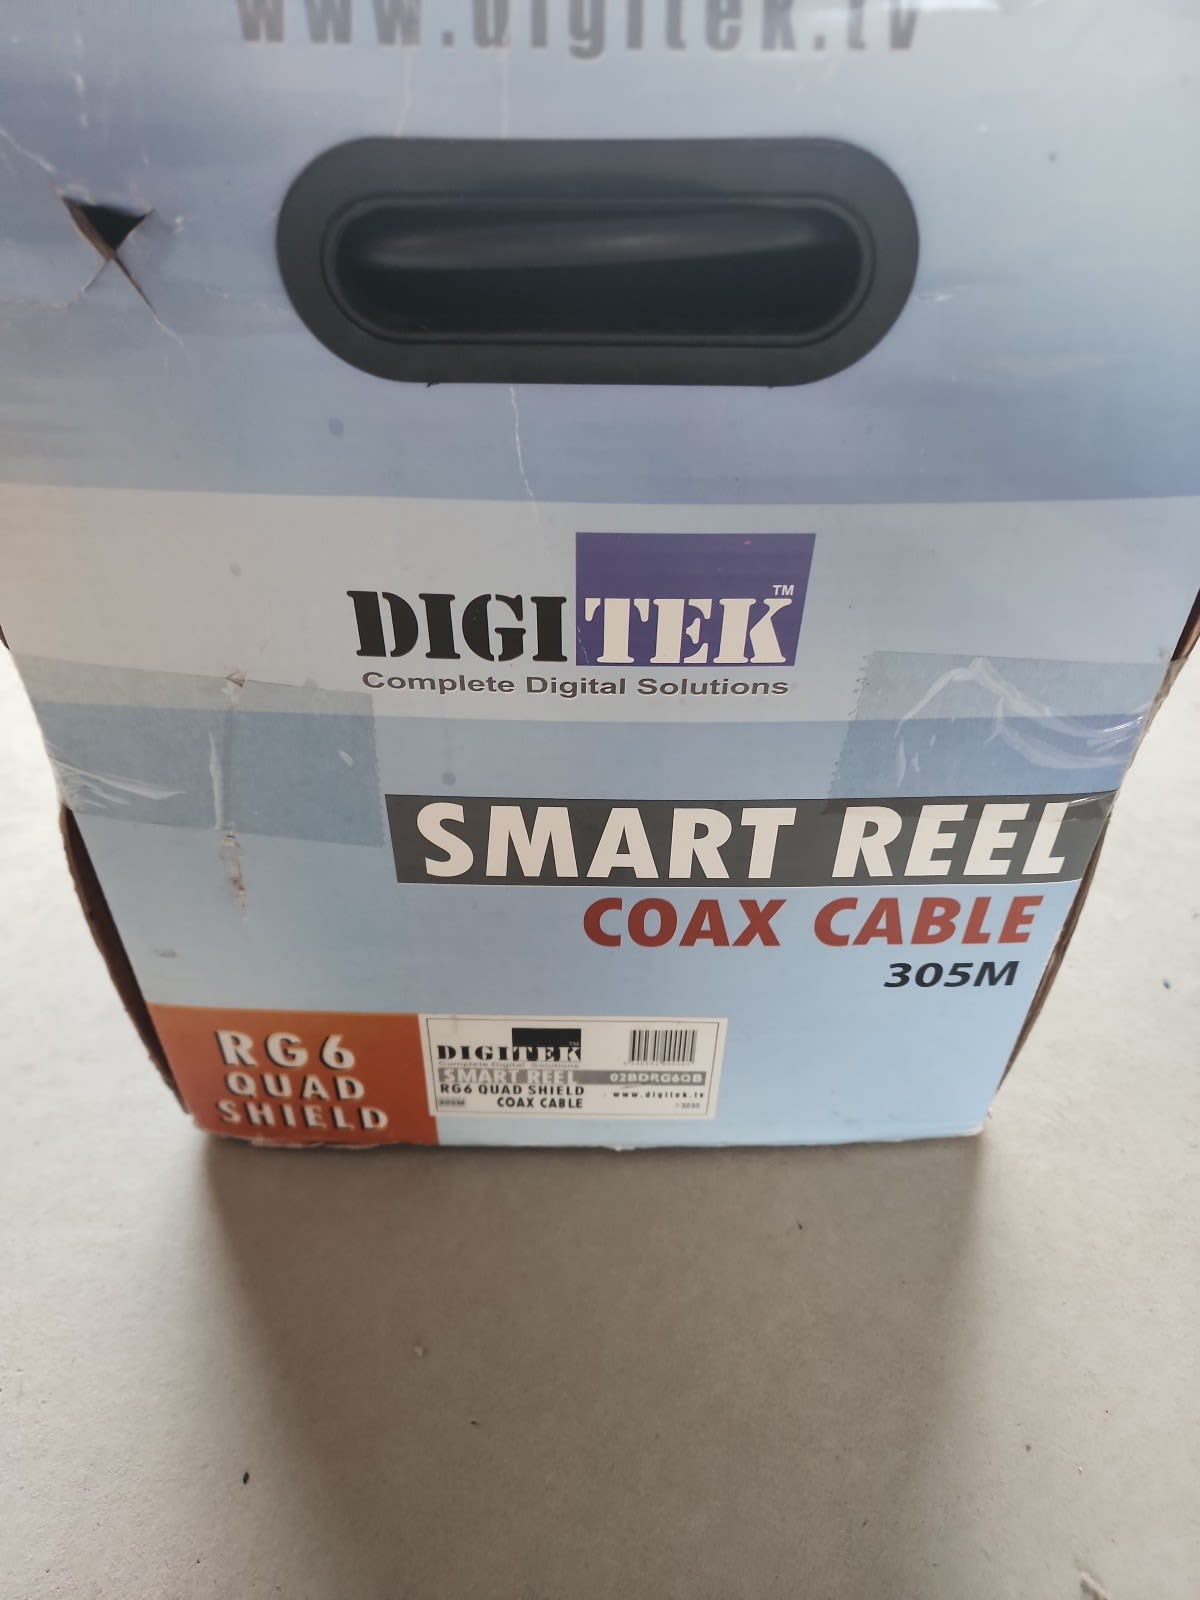 rg6 cables  Gumtree Australia Free Local Classifieds